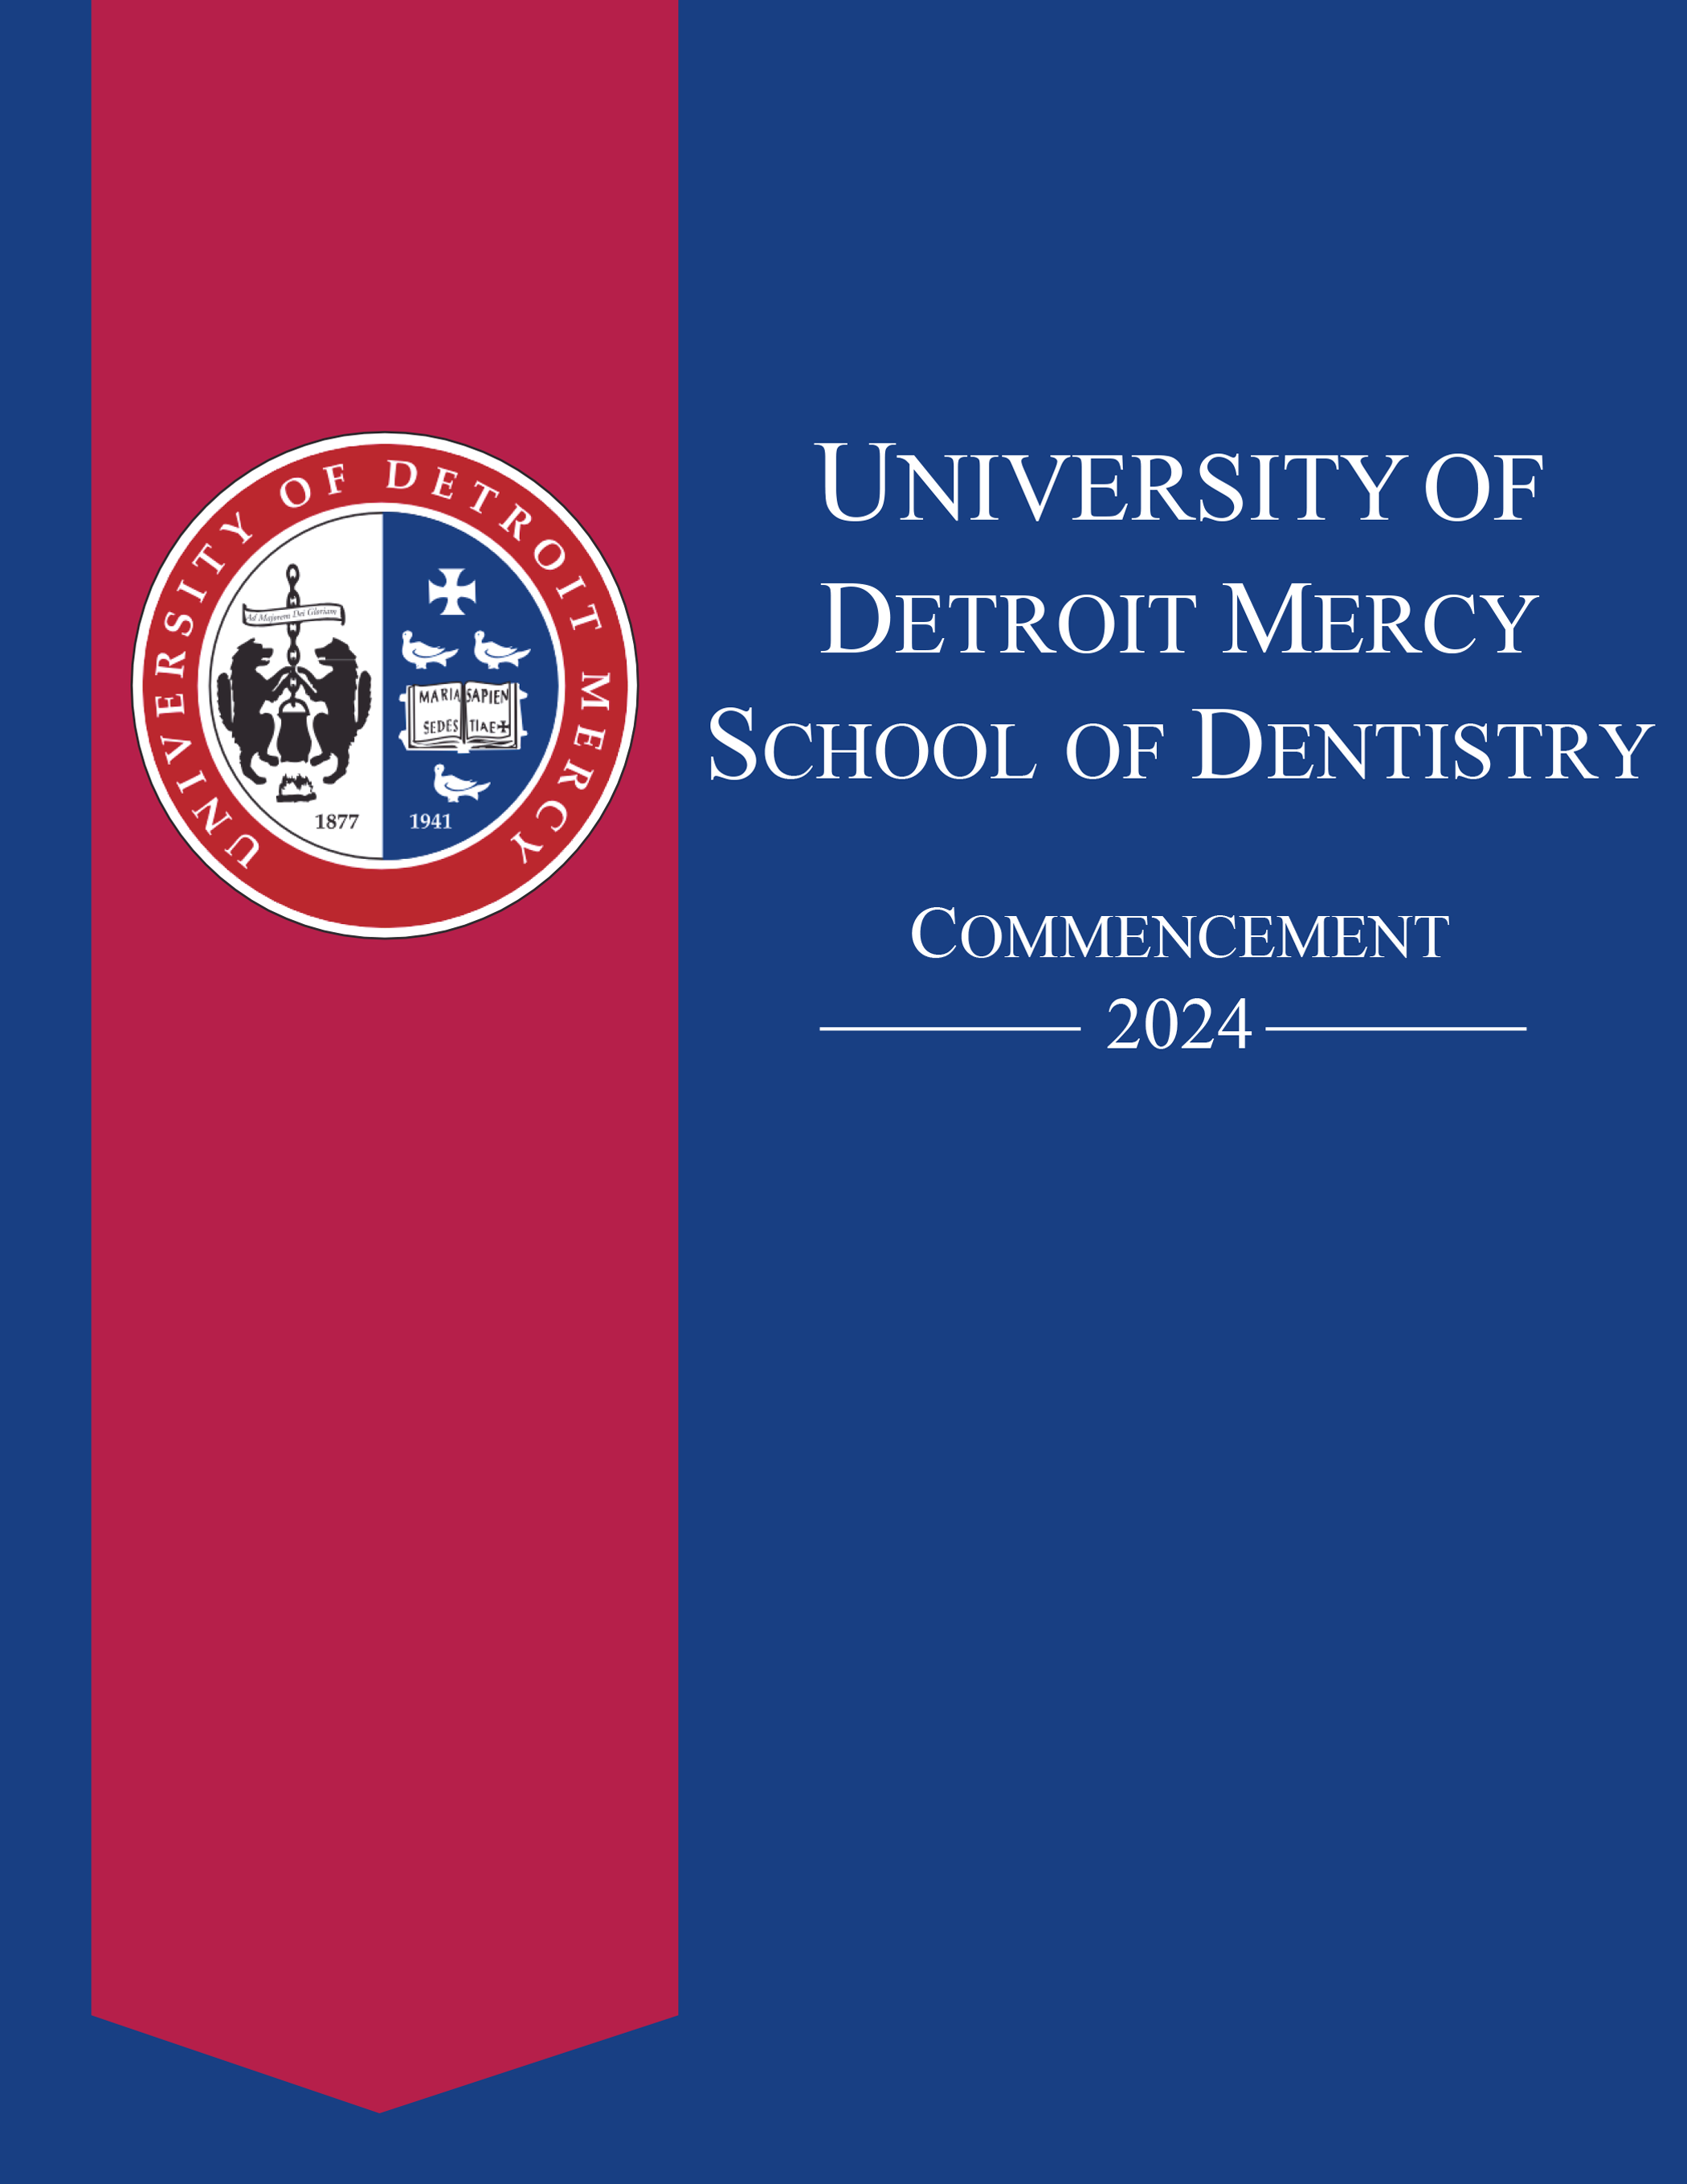 A program cover for the University of Detroit Mercy School of Dentistry 2024 Commencement featuring the UDM crest.